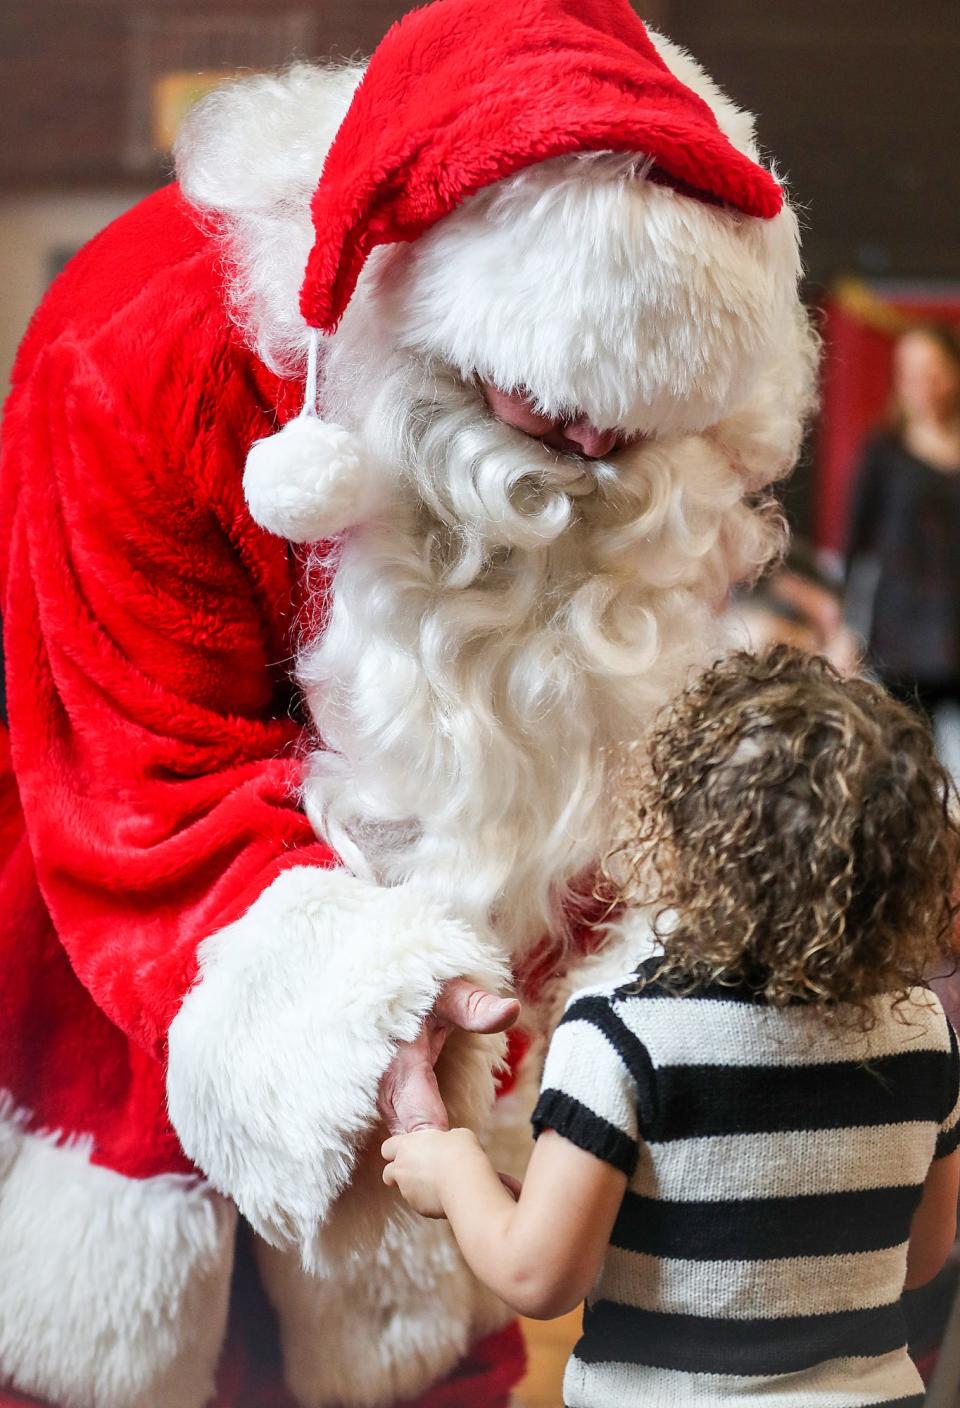 Santa Claus greets a little one during the 4th annual Brunch with Santa hosted by Indy Parks at Christian Park in Indianapolis, Saturday, Dec. 22, 2018.